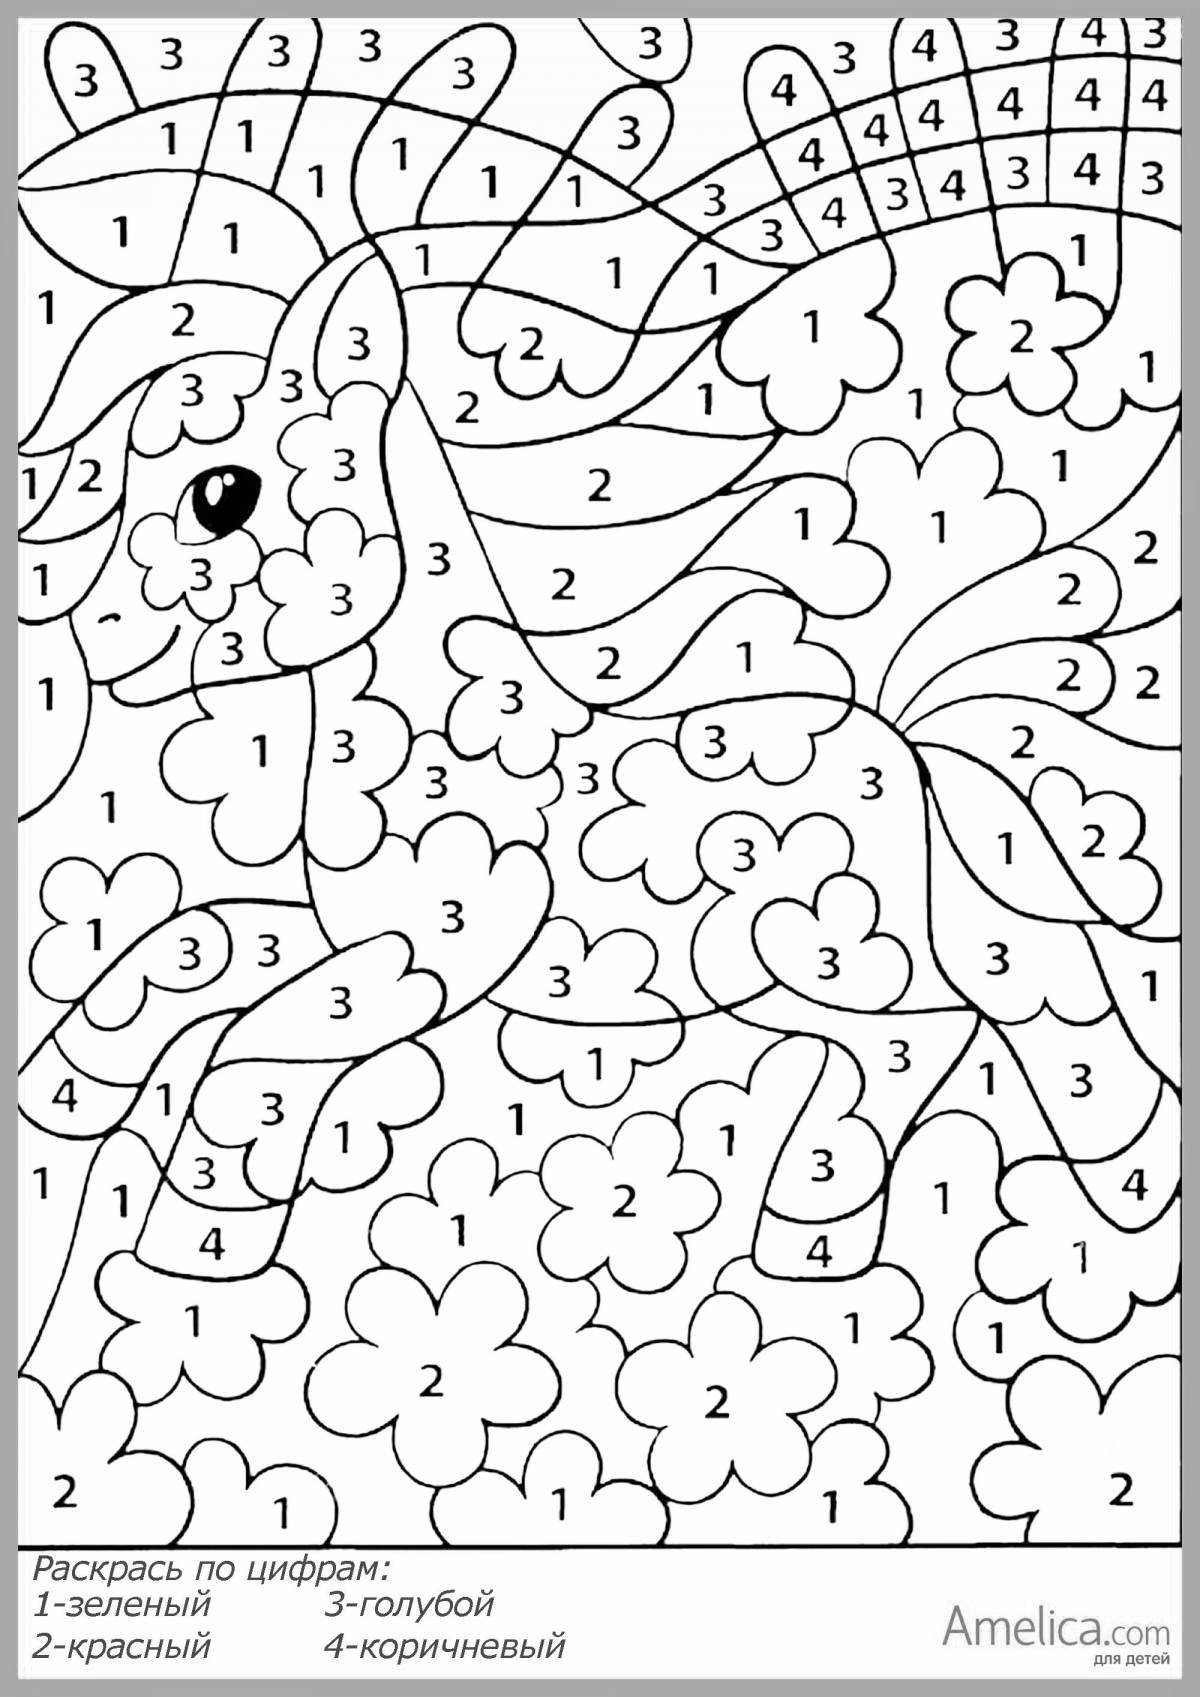 Adorable digital coloring book for 7 year olds